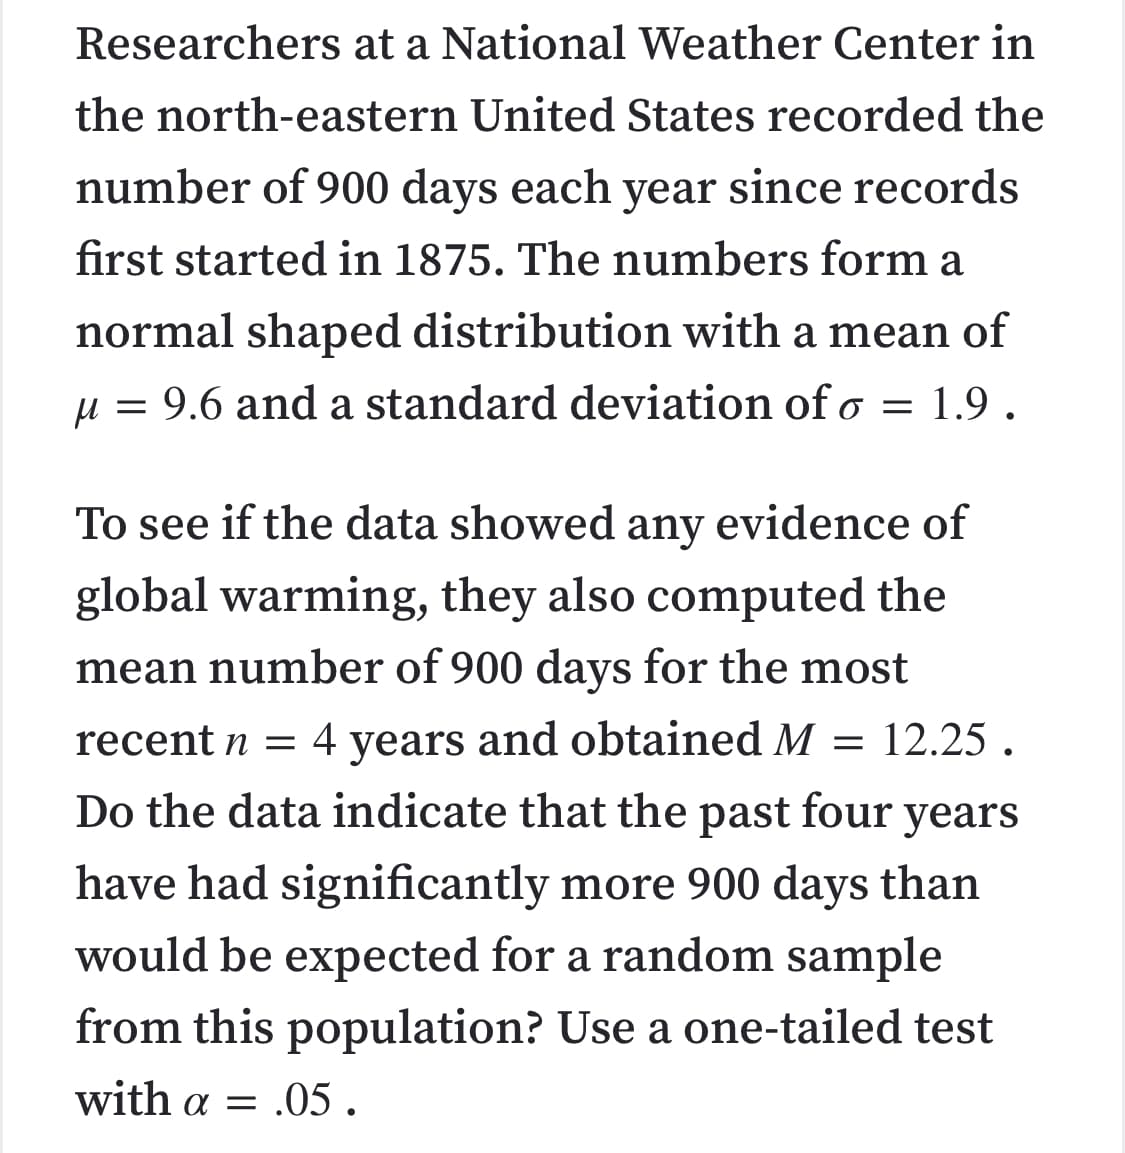 Researchers at a National Weather Center in
the north-eastern United States recorded the
number of 900 days each year since records
first started in 1875. The numbers form a
normal shaped distribution with a mean of
µ = 9.6 and a standard deviation of o
1.9.
To see if the data showed any evidence of
global warming, they also computed the
mean number of 900 days for the most
years and obtained M = 12.25 .
Do the data indicate that the past four years
recent n = 4
have had significantly more 900 days than
would be expected for a random sample
from this population? Use a one-tailed test
with a = .05.
